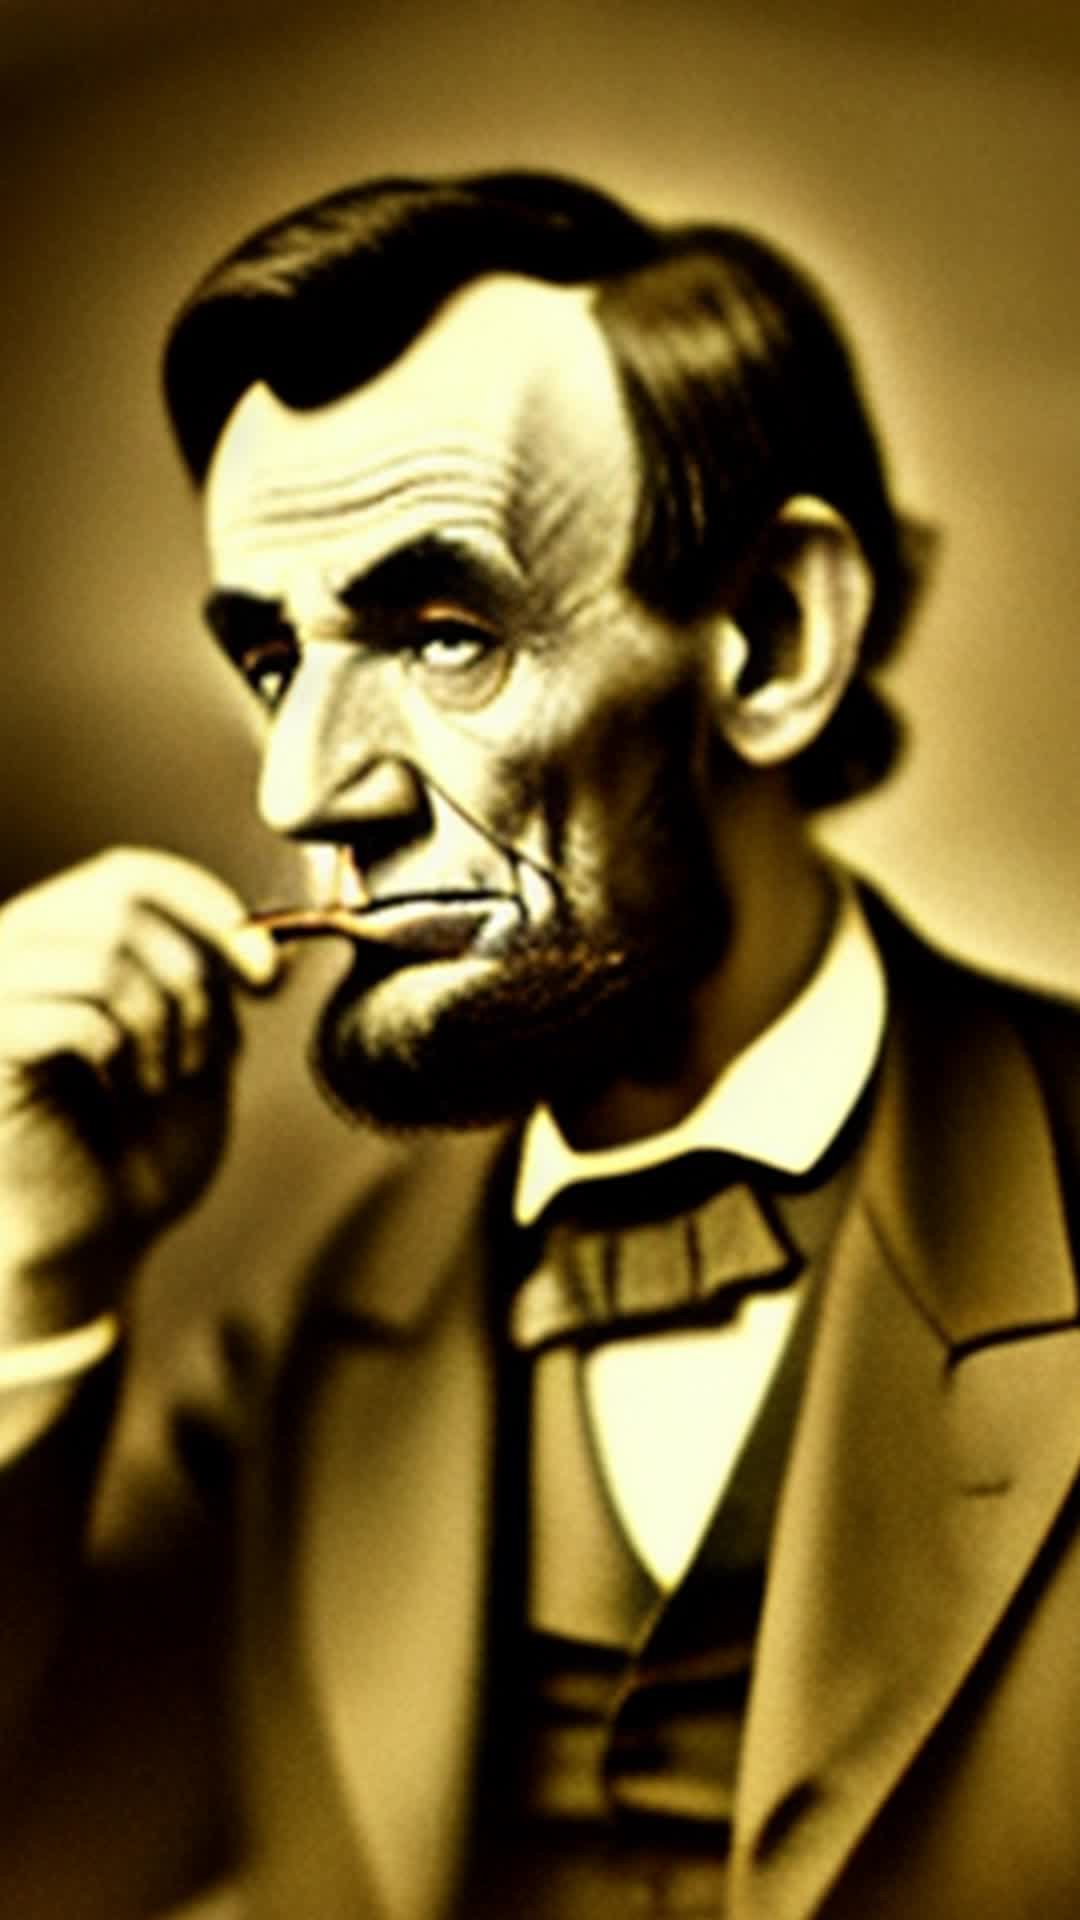 Abraham Lincoln styling his beard, historical grooming, antique mirror reflection, applying traditional beard product, thoughtful expression, 19th-century grooming tools, sepia-toned atmosphere, vintage, soft shadows, detailed period attire, portrait orientation